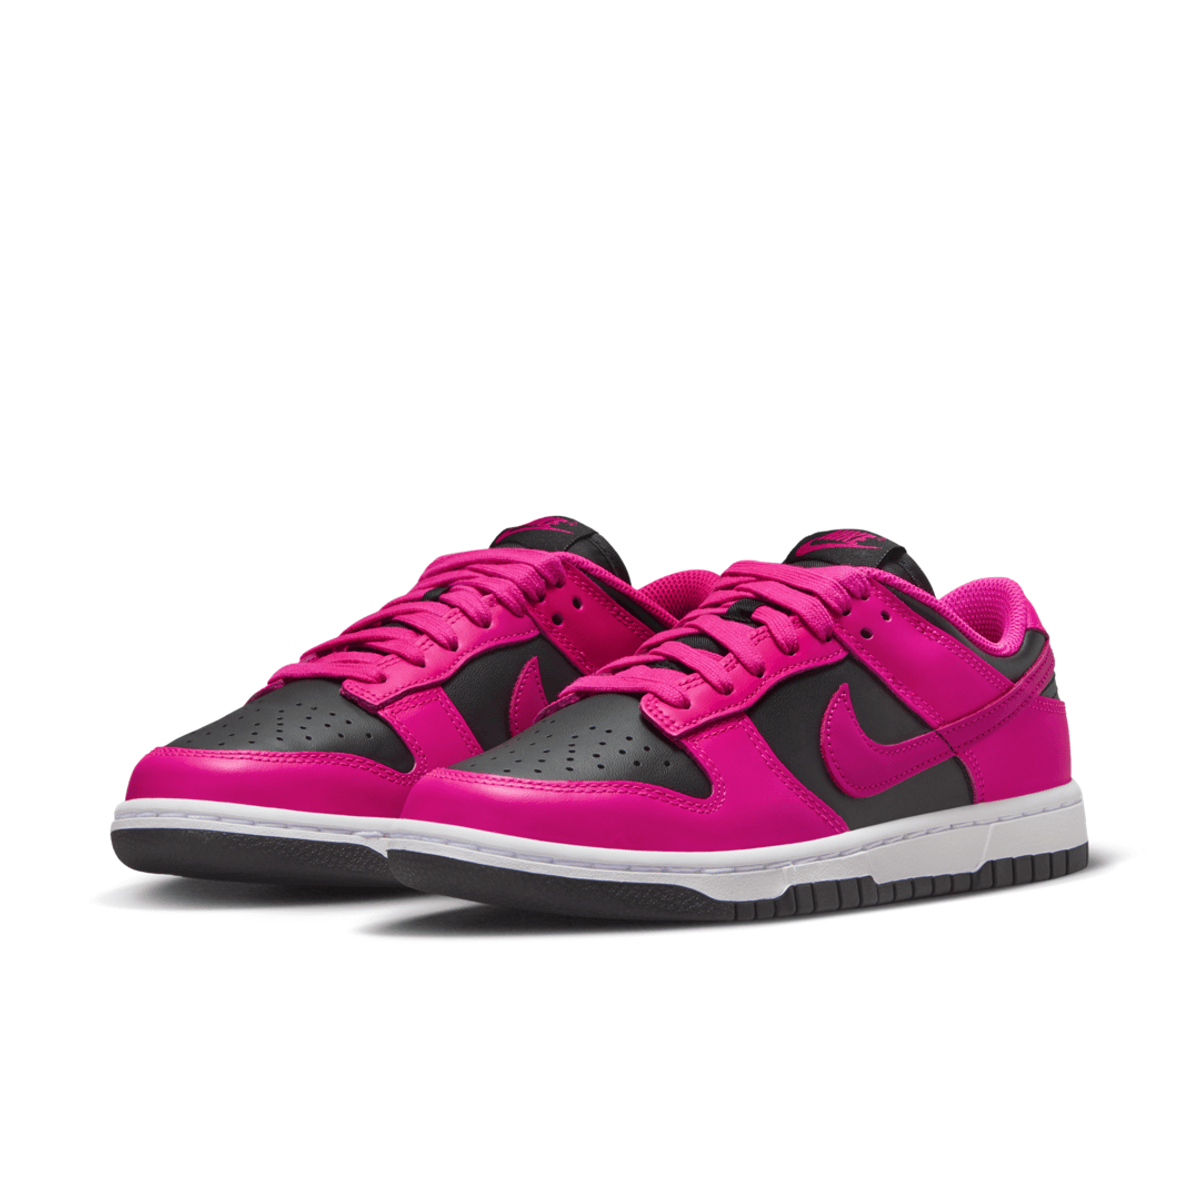 The Nike Dunk Low Fierce Pink Will release Exclusively In WMNS Sizing